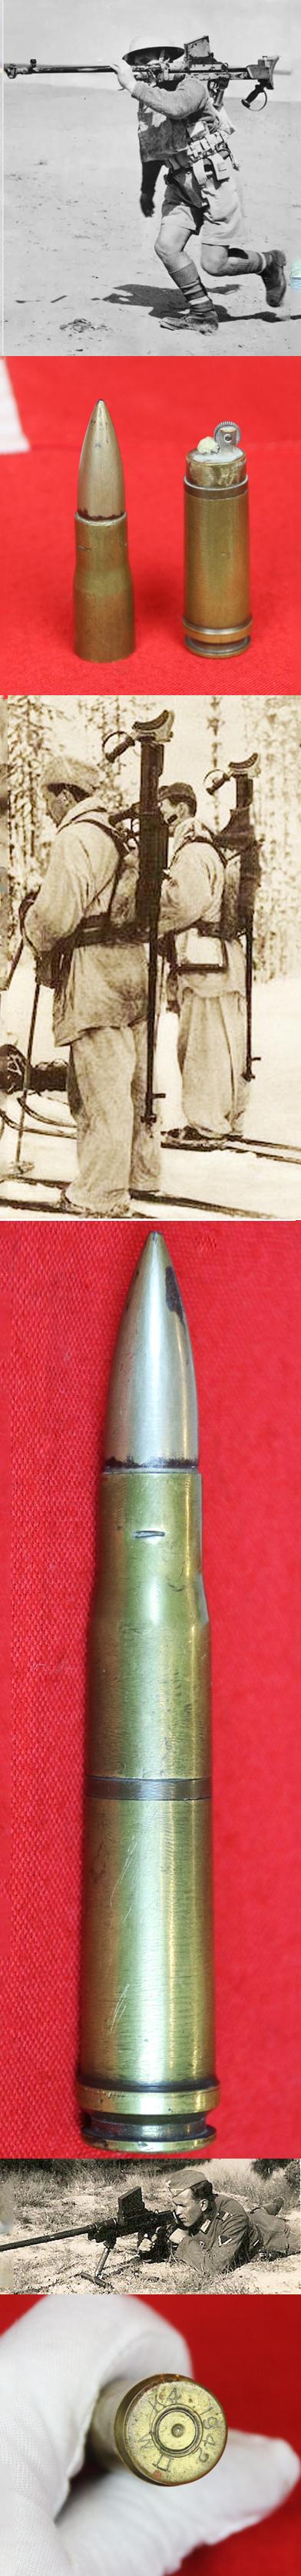 A Most Rare, 'Trench Art', .55 Boys Anti Tank Rifle Round 1942, Converted Into a Soldier's Desert Rat Period Campaign Cigarette Lighter